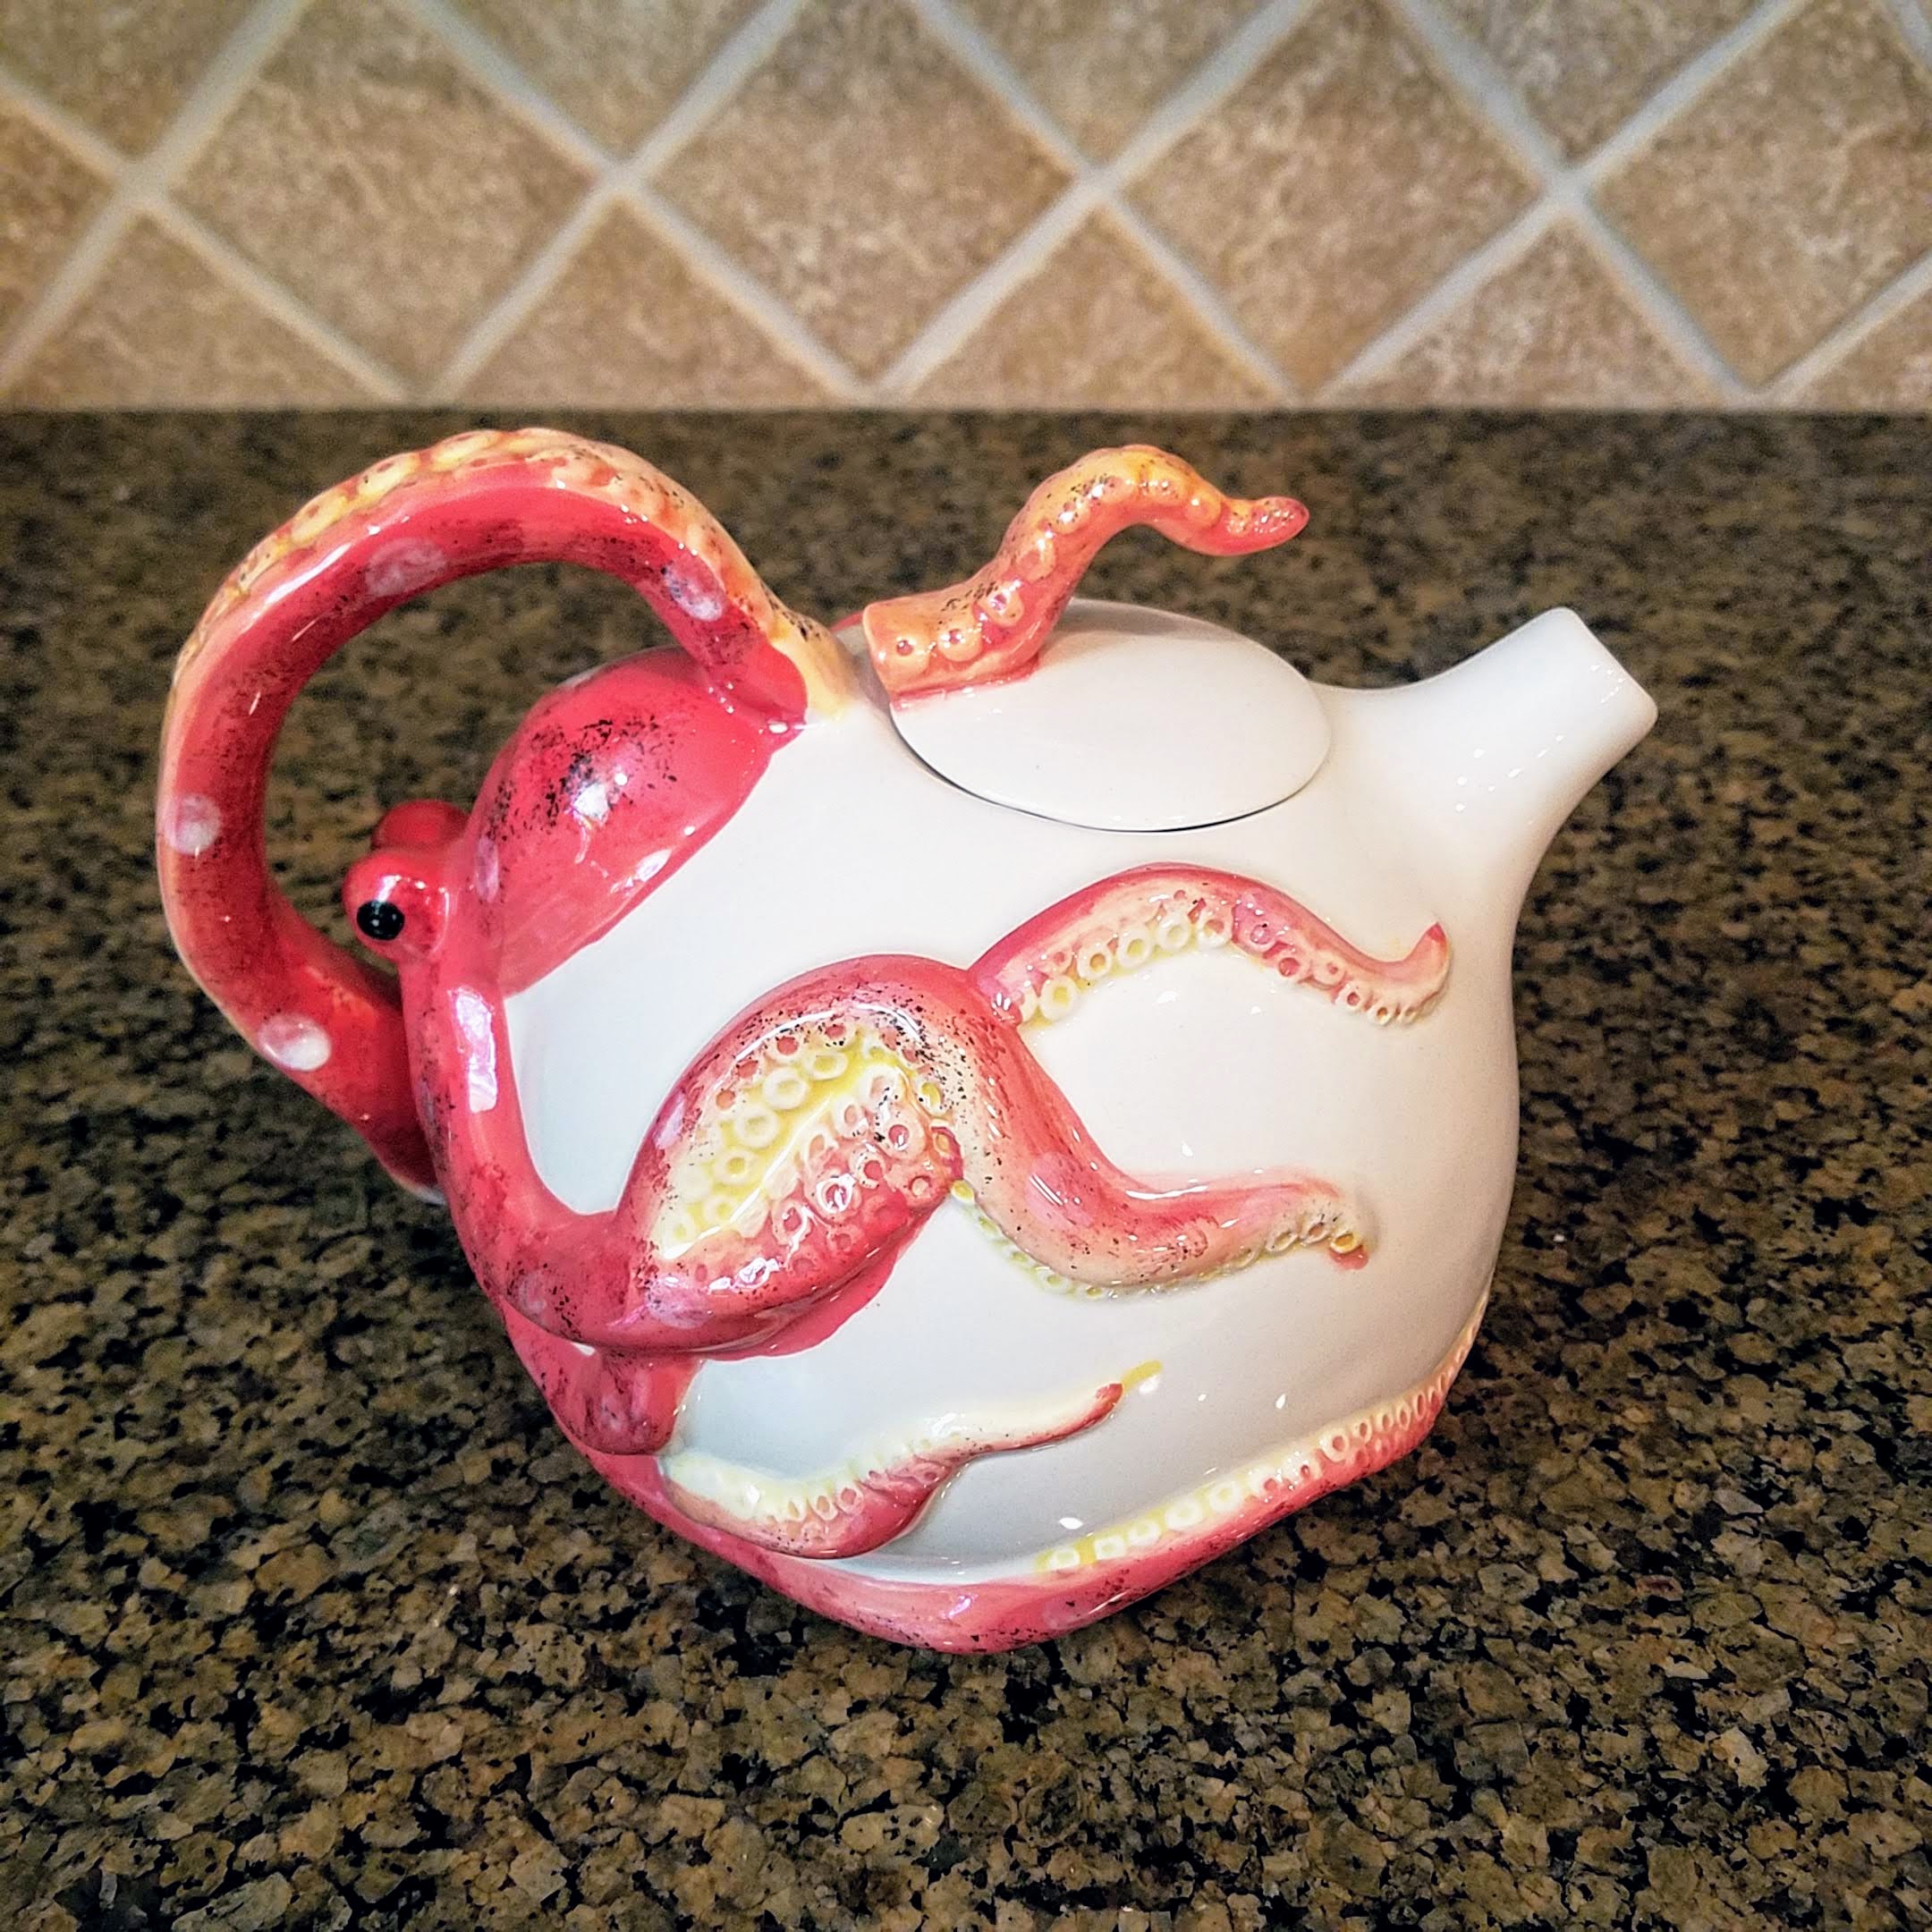 This Octopus Teapot Red Sea Decorative Collectable Kitchen Decor by Blue Sky is made with love by Premier Homegoods! Shop more unique gift ideas today with Spots Initiatives, the best way to support creators.